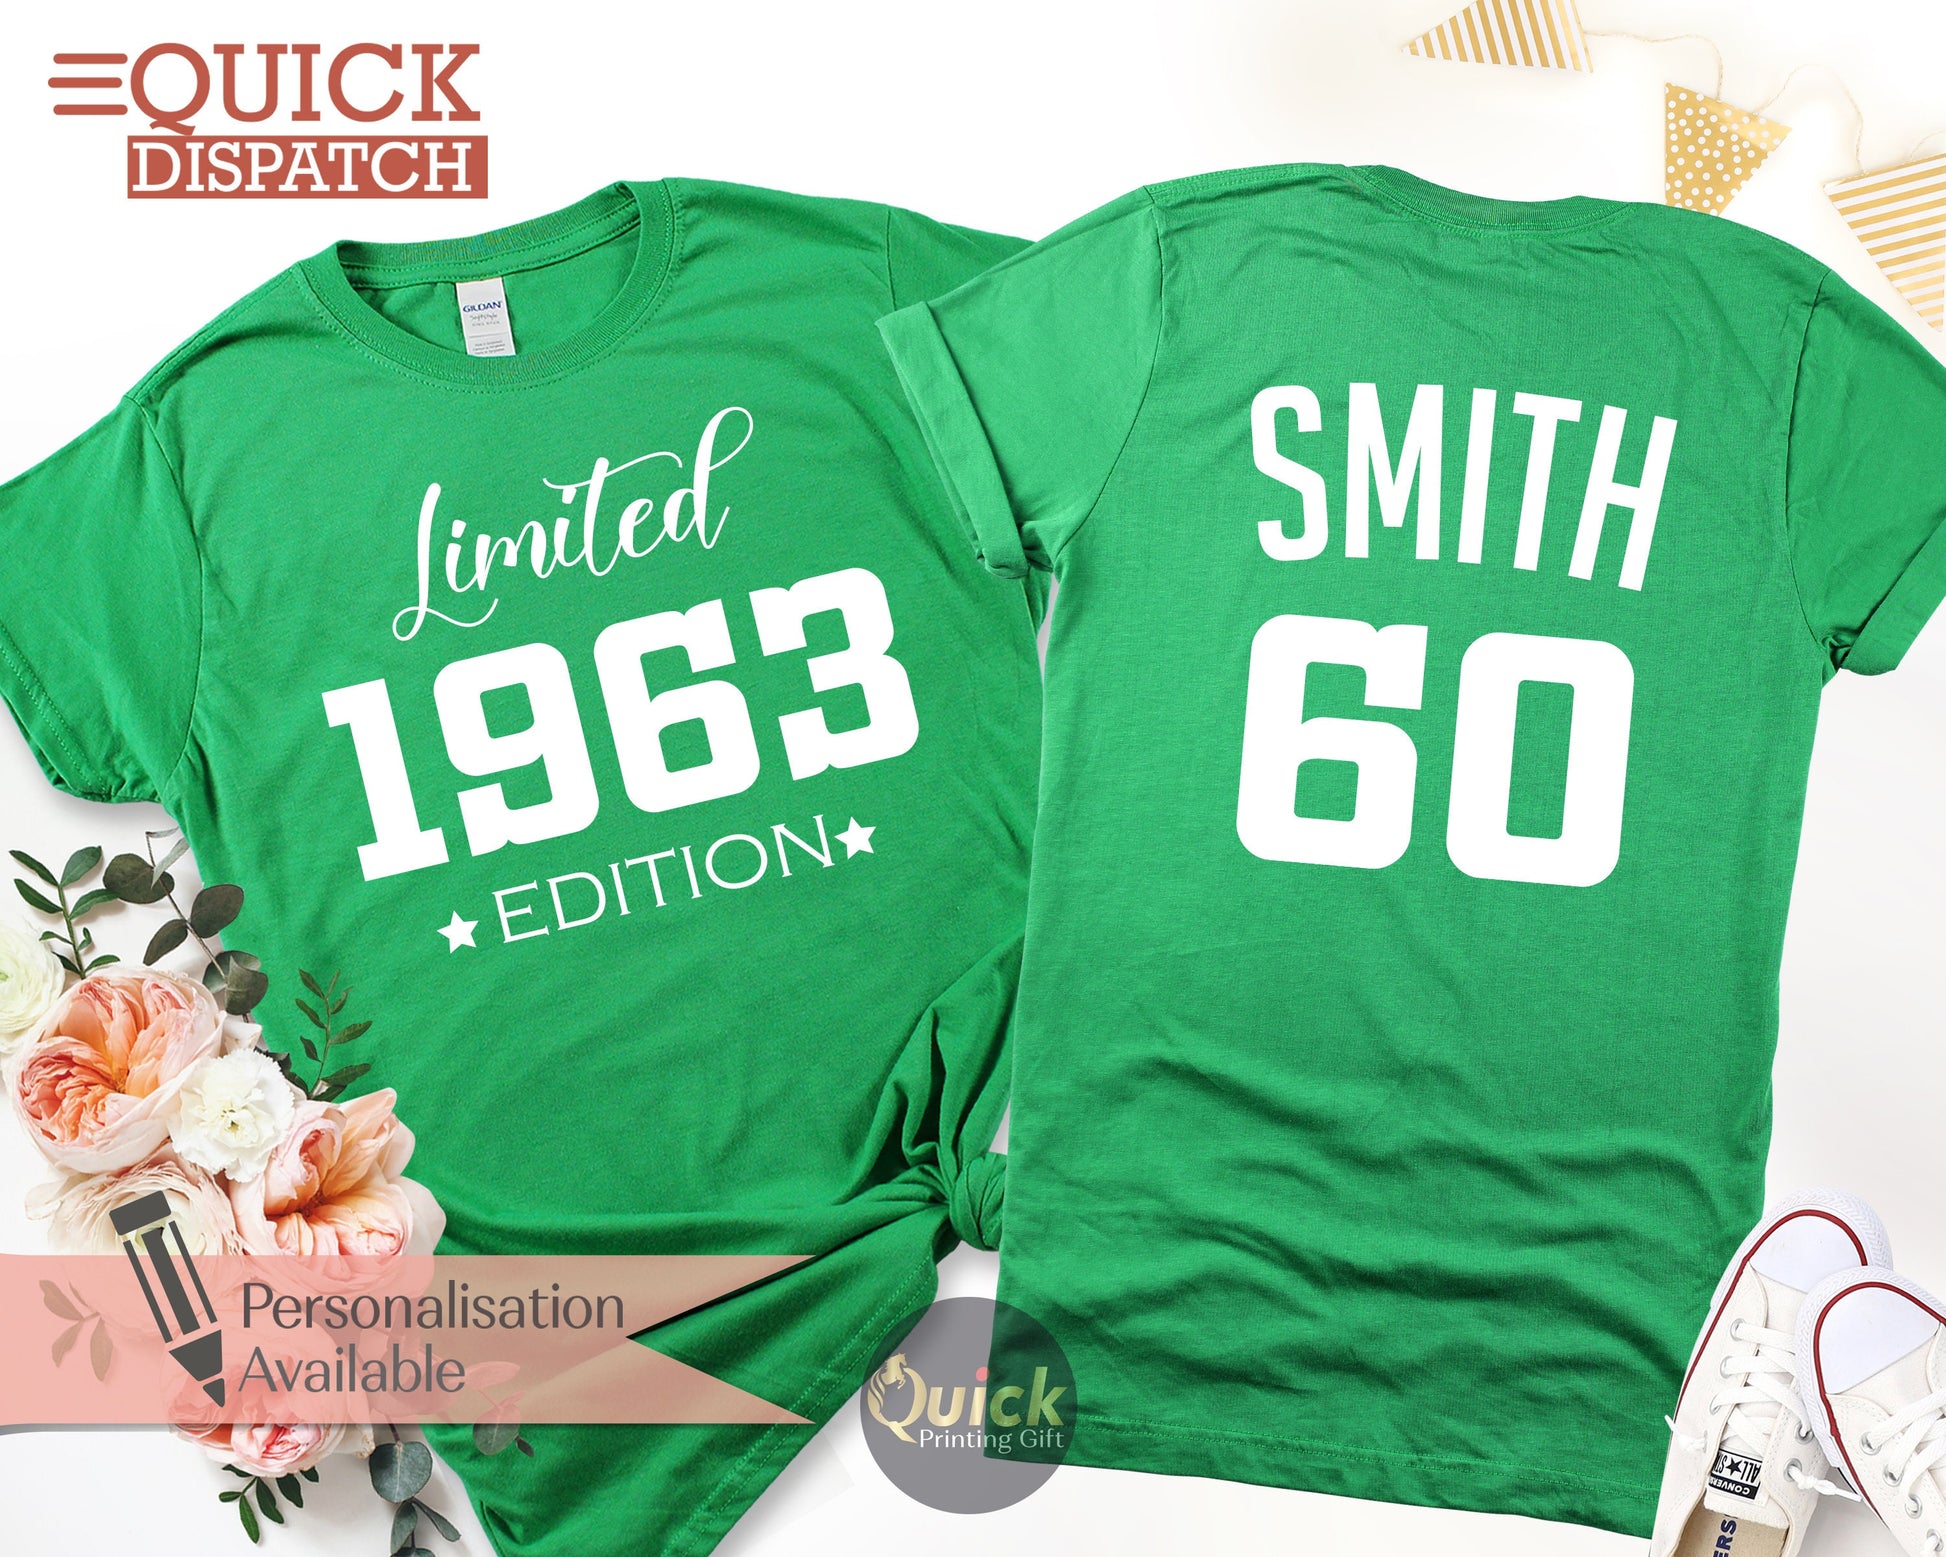 Limited 1963 Edition Shirt